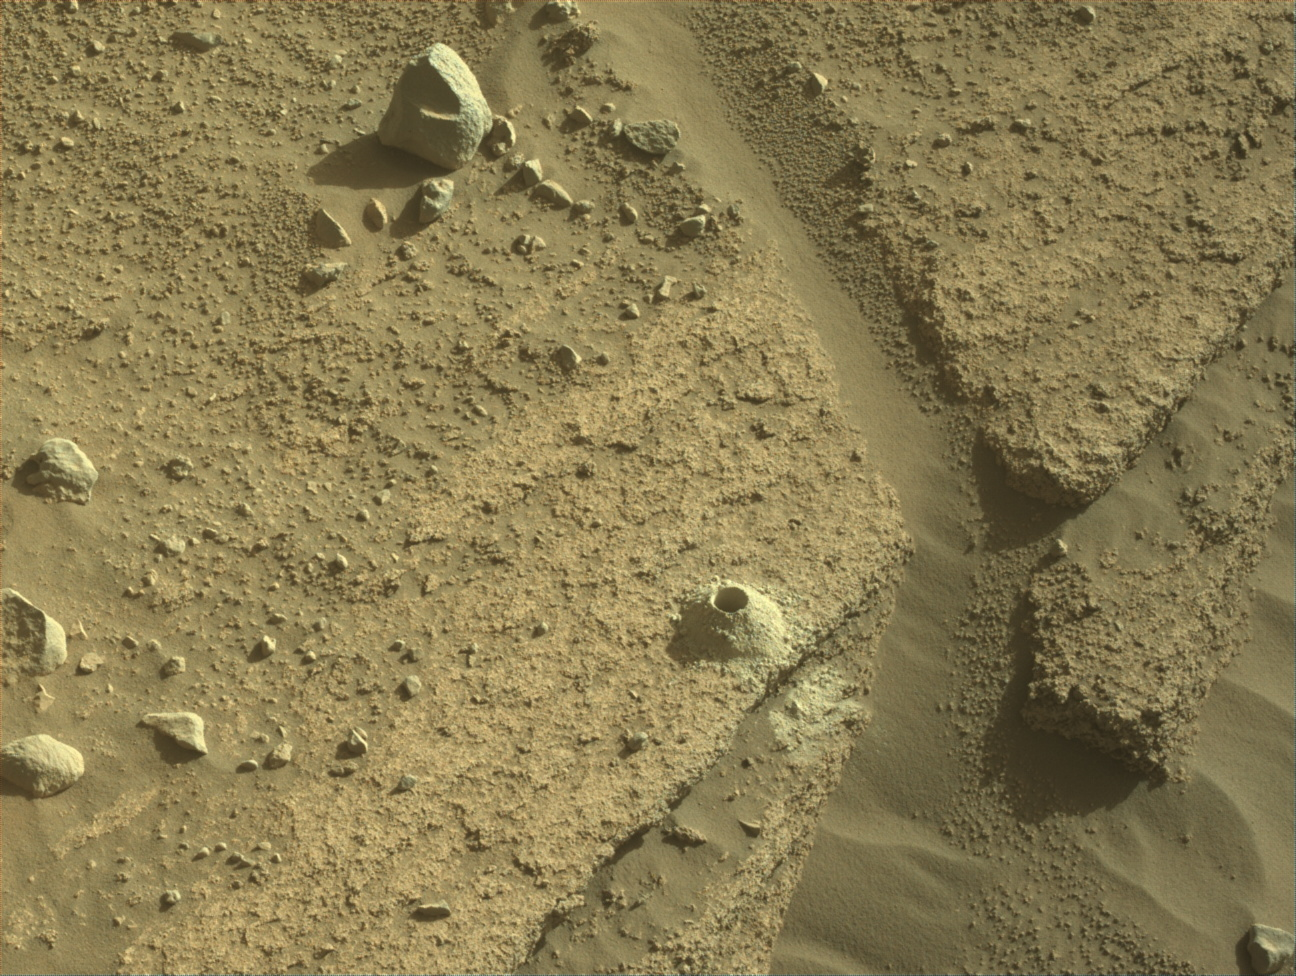 Image taken was taken by the Mars Perseverance rover after collecting the rock sample 20 at Otis Peak. There is a smooth crevice to the right side of the drill hole.